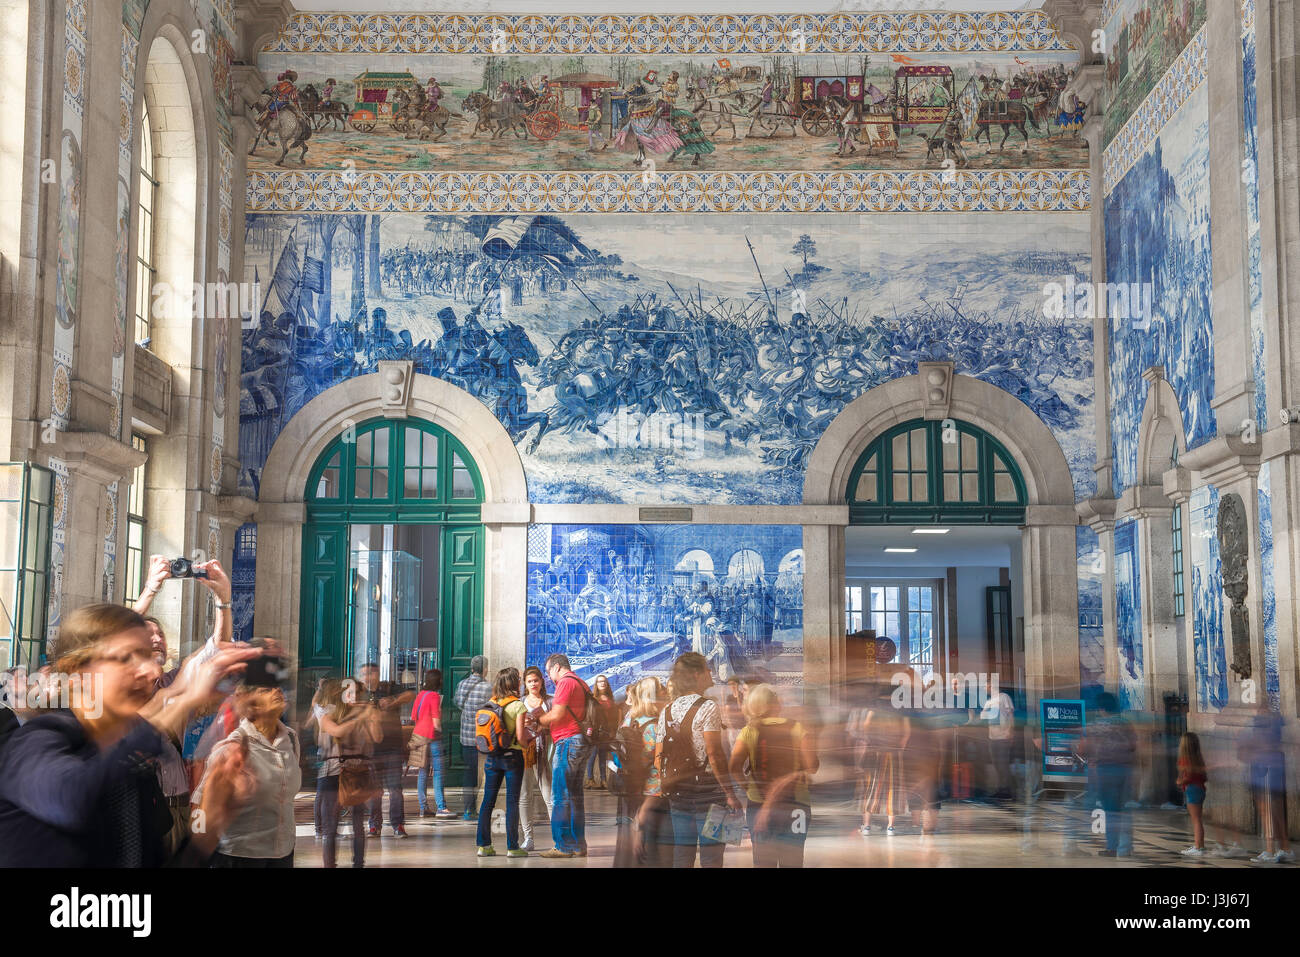 Porto Portugal azulejos, view of the busy entrance hall of the Sao Bento  train station decorated with blue azulejo tiles depicting historical scenes  Stock Photo - Alamy